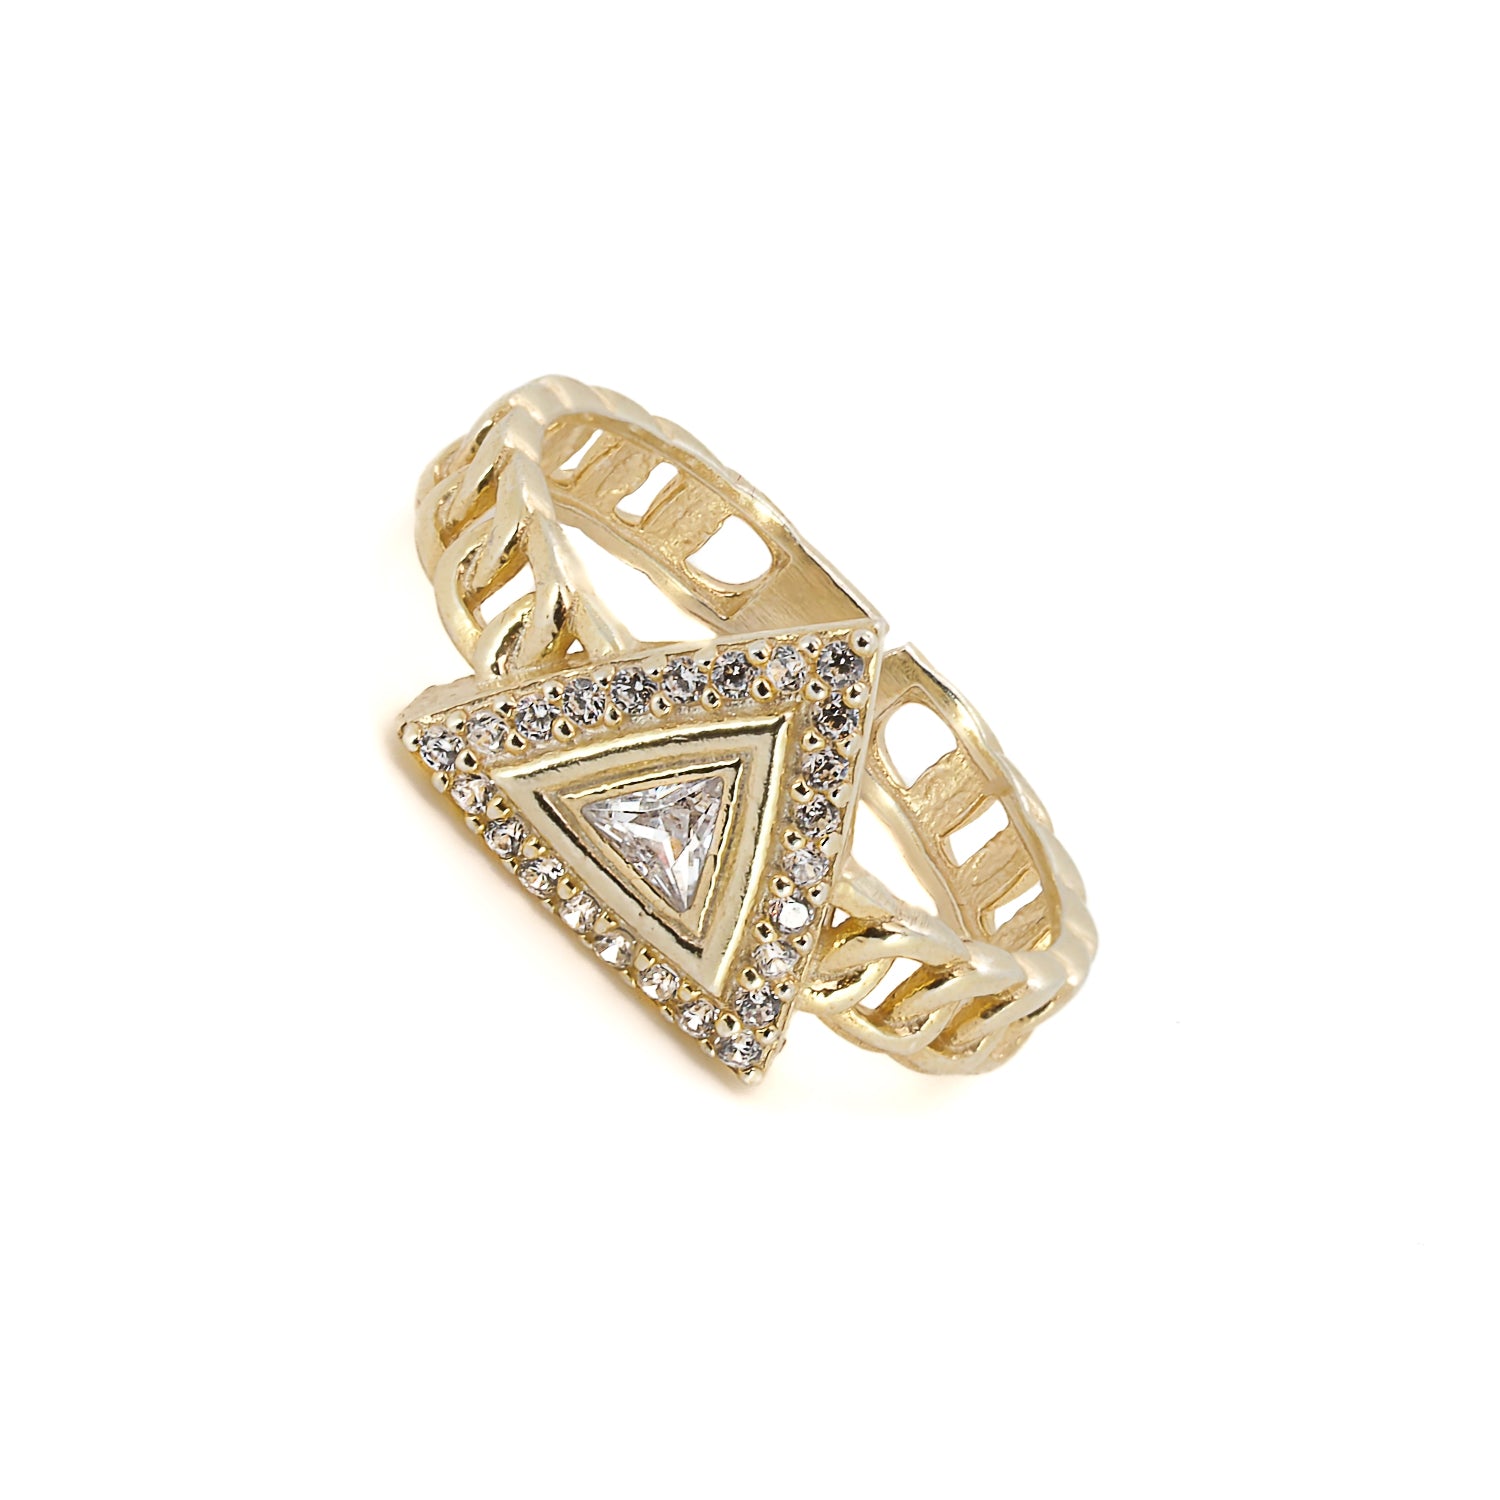 A closer look at the Gold Vermeil Diamond Ring&#39;s exquisite design.